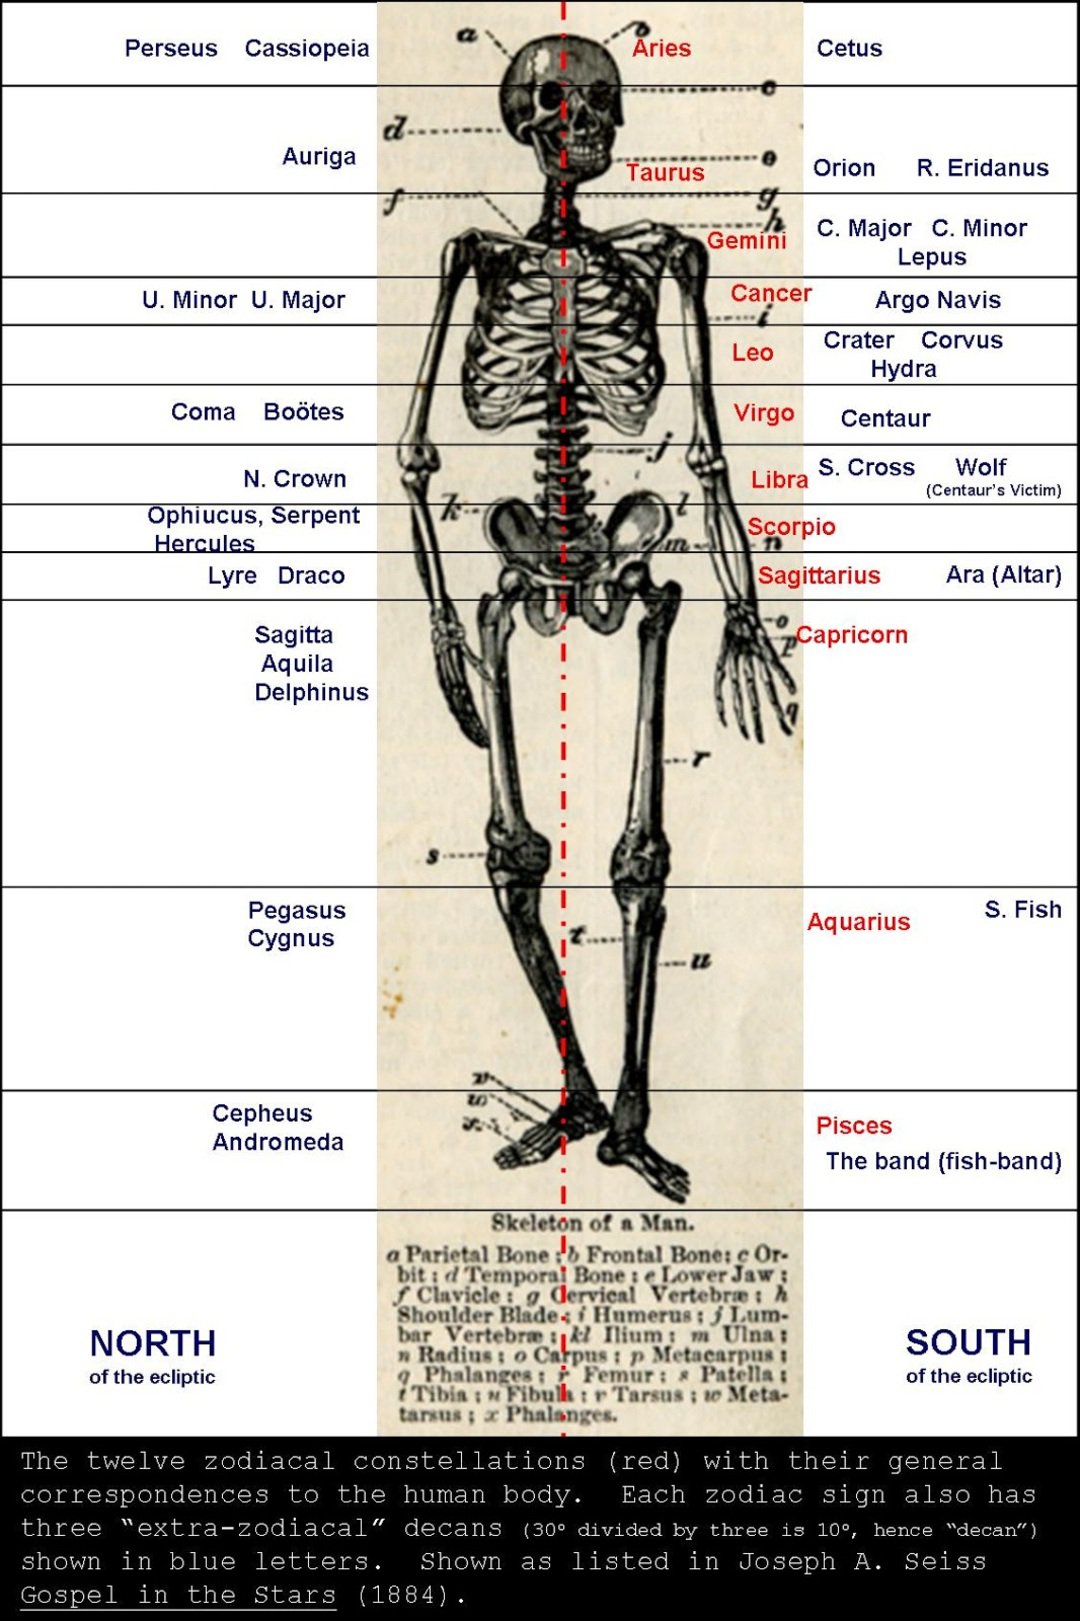 Zodiac and extra zodiacal sign or decans with human body